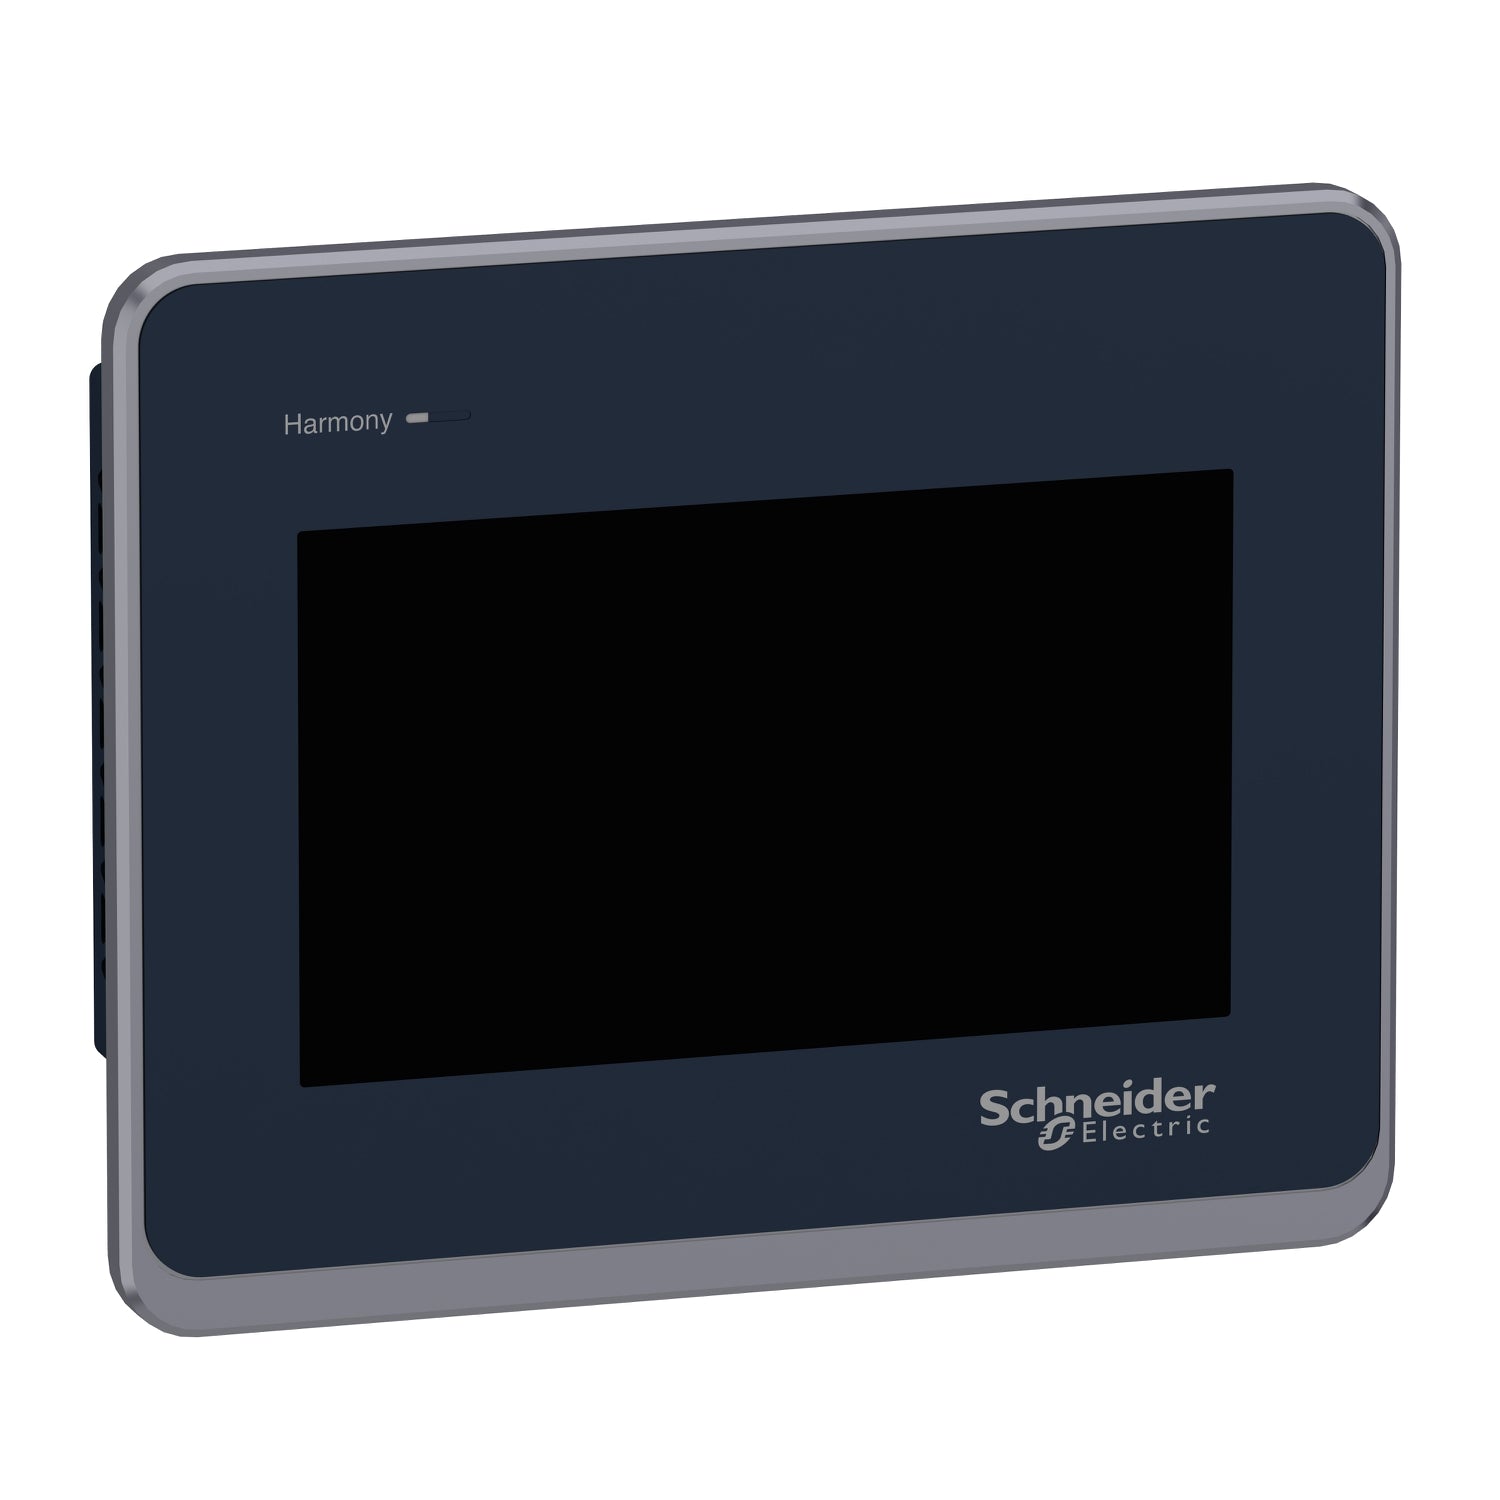 HMIST6200 | Schneider Electric | Touch panel screen, Harmony ST6, 4inch wide display, 1COM, 1Ethernet, USB host and device, 24V DC